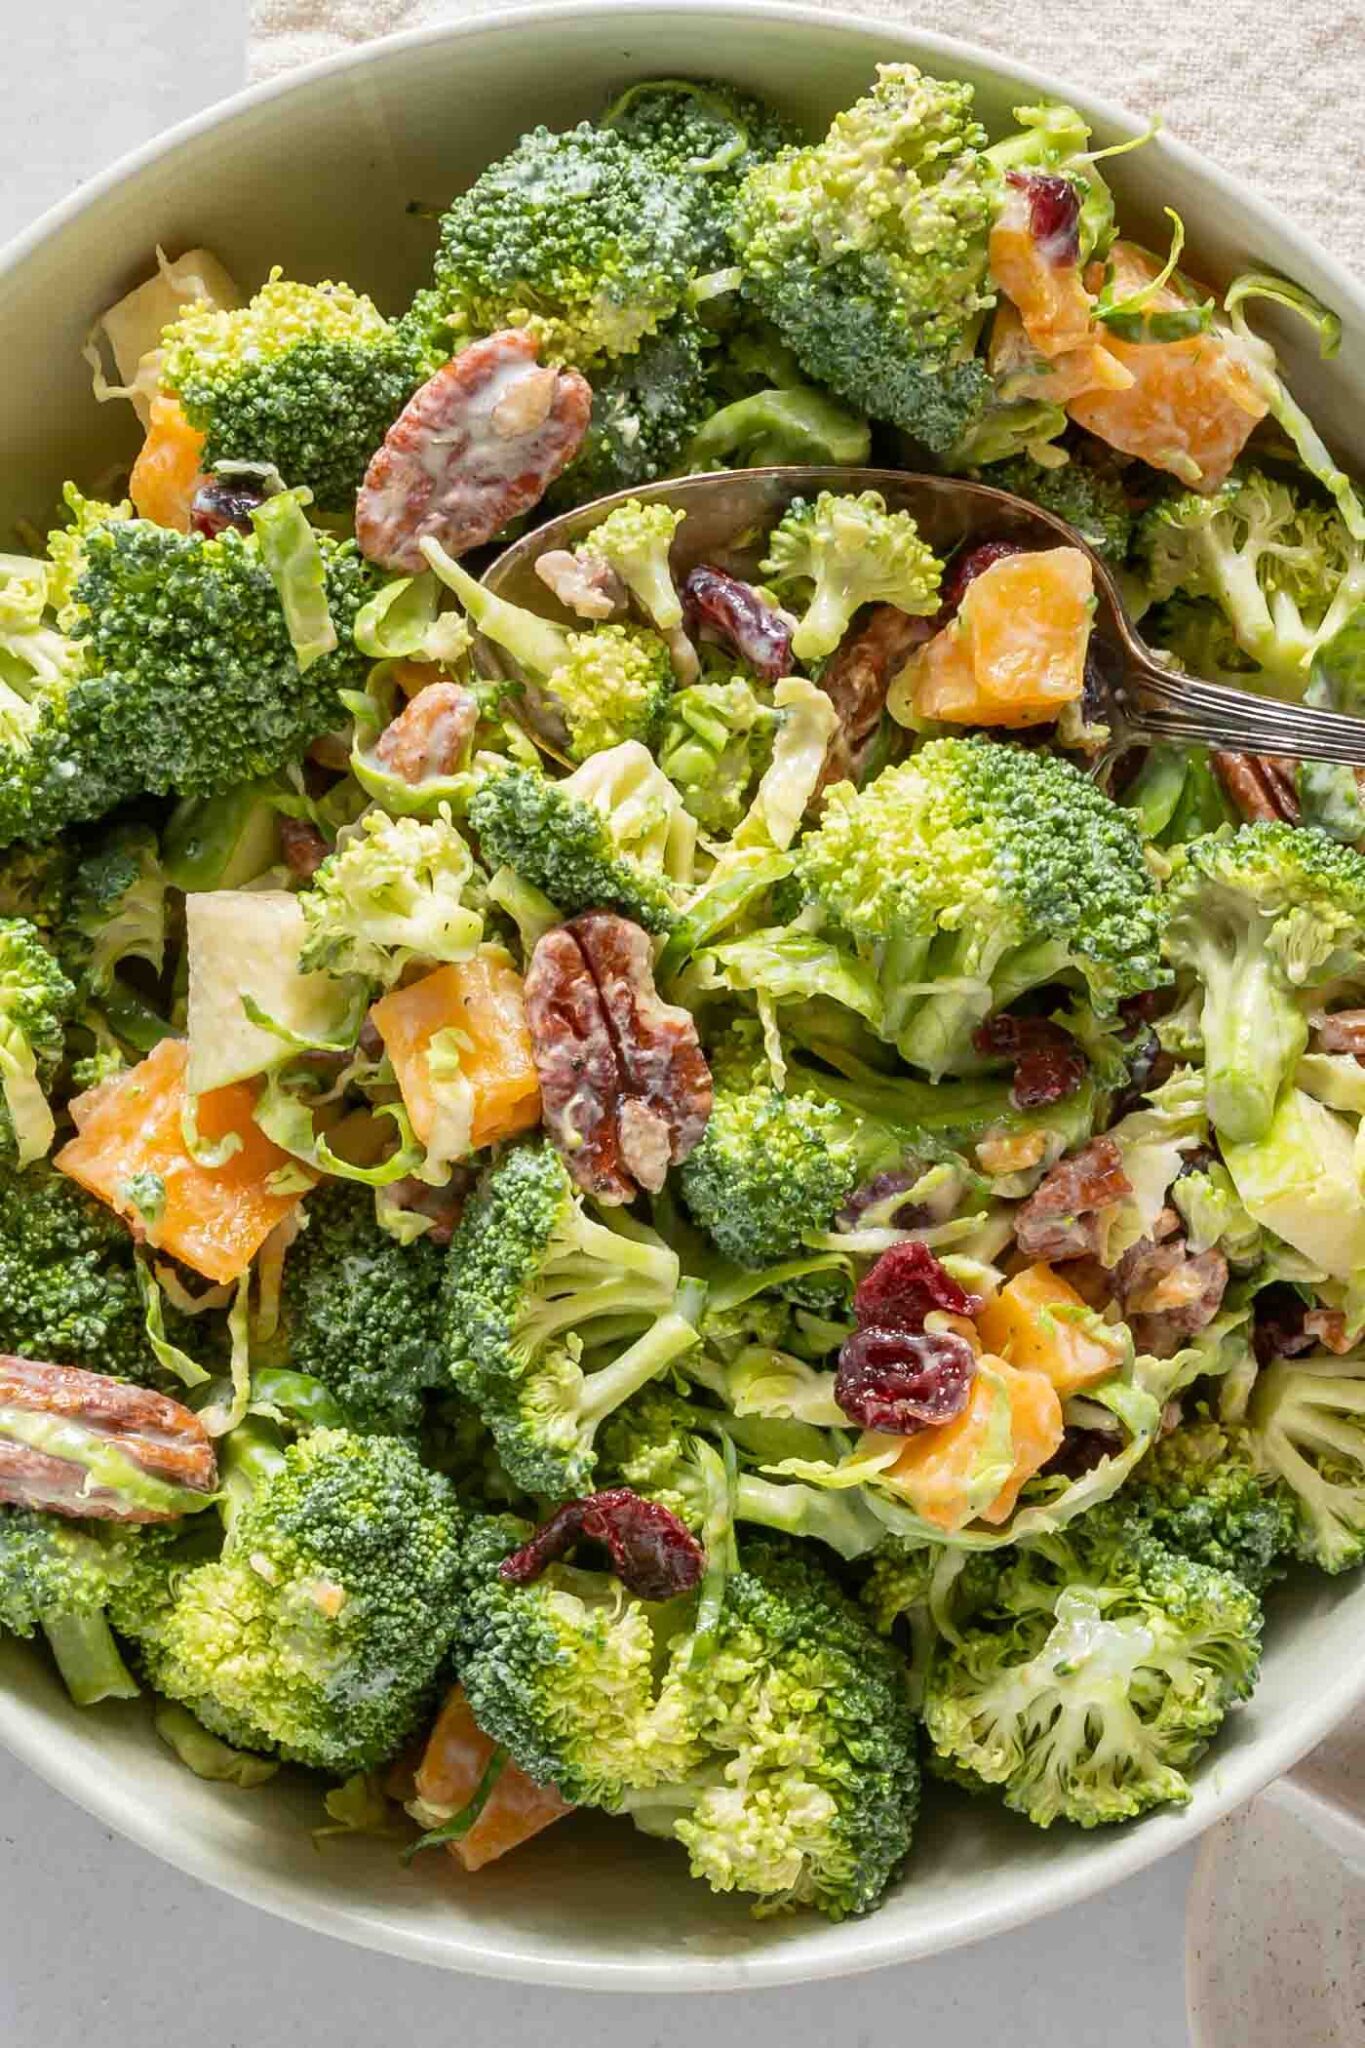 Creamy Broccoli Apple Salad with Cranberries and Brussels Sprouts